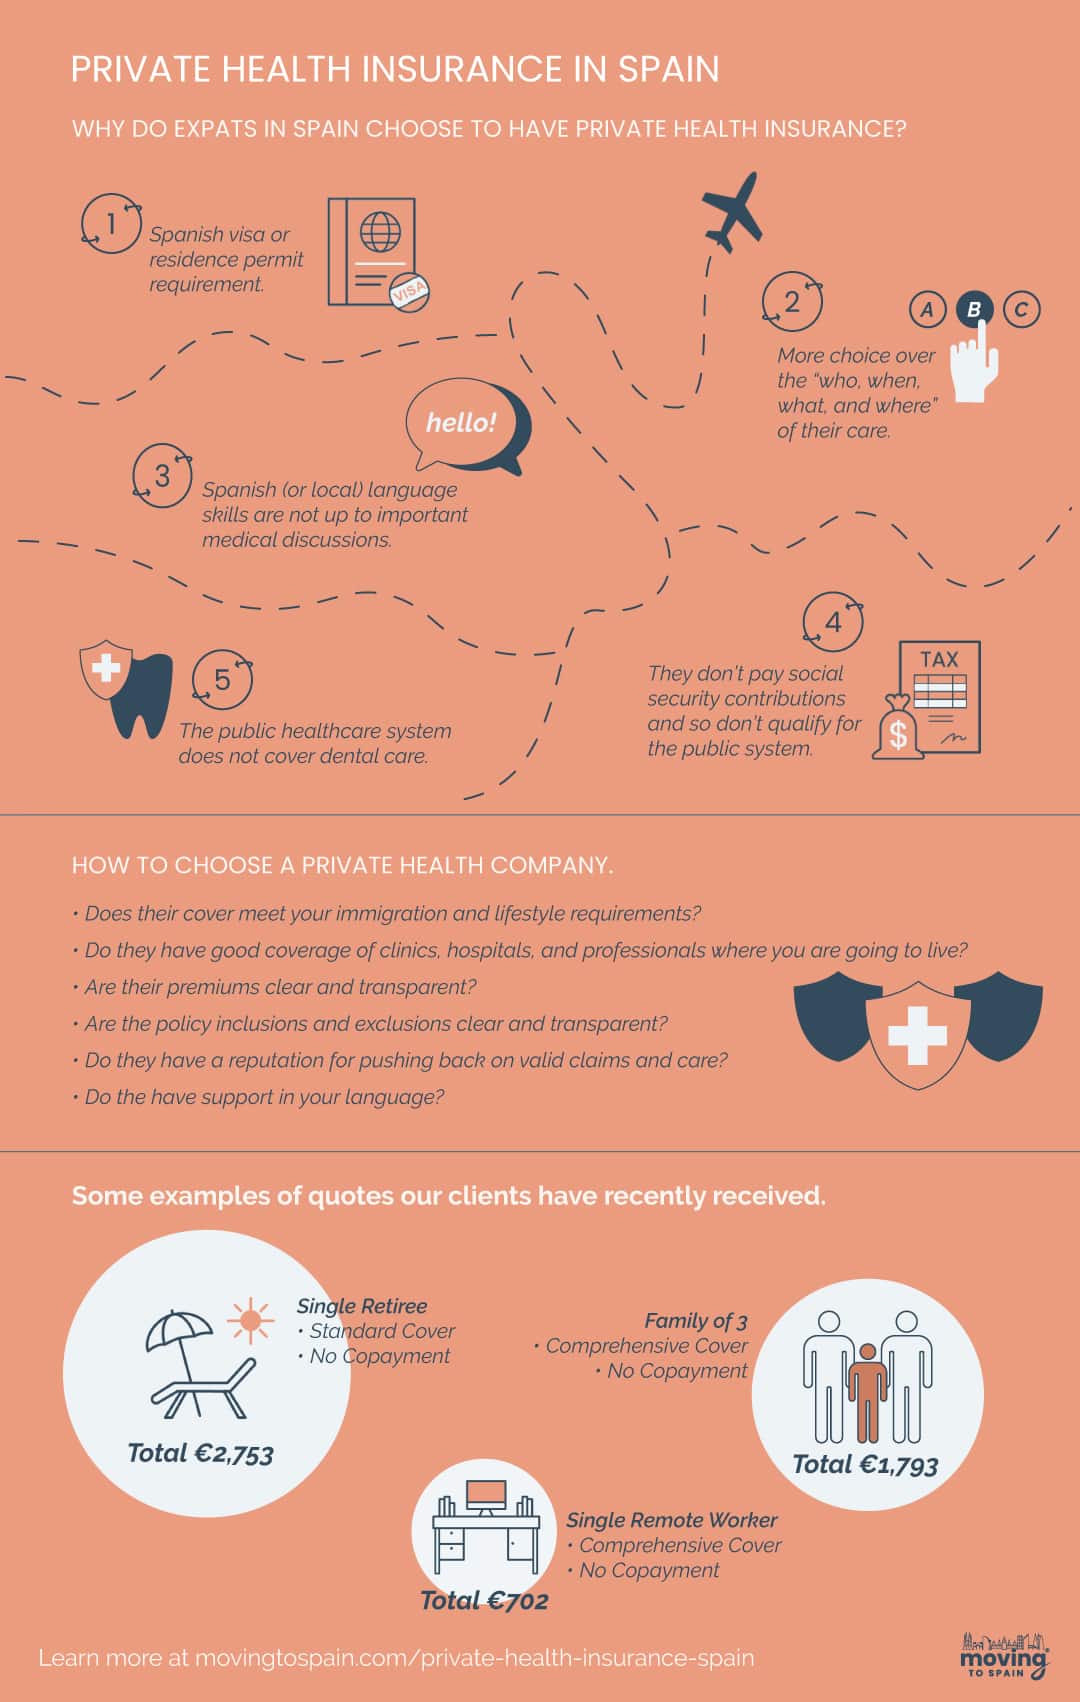 An infographic explaining how to choose the Expat Private Health Insurance in Spain + the main reasons Epxtas use Private Medical Insurance in Spain.